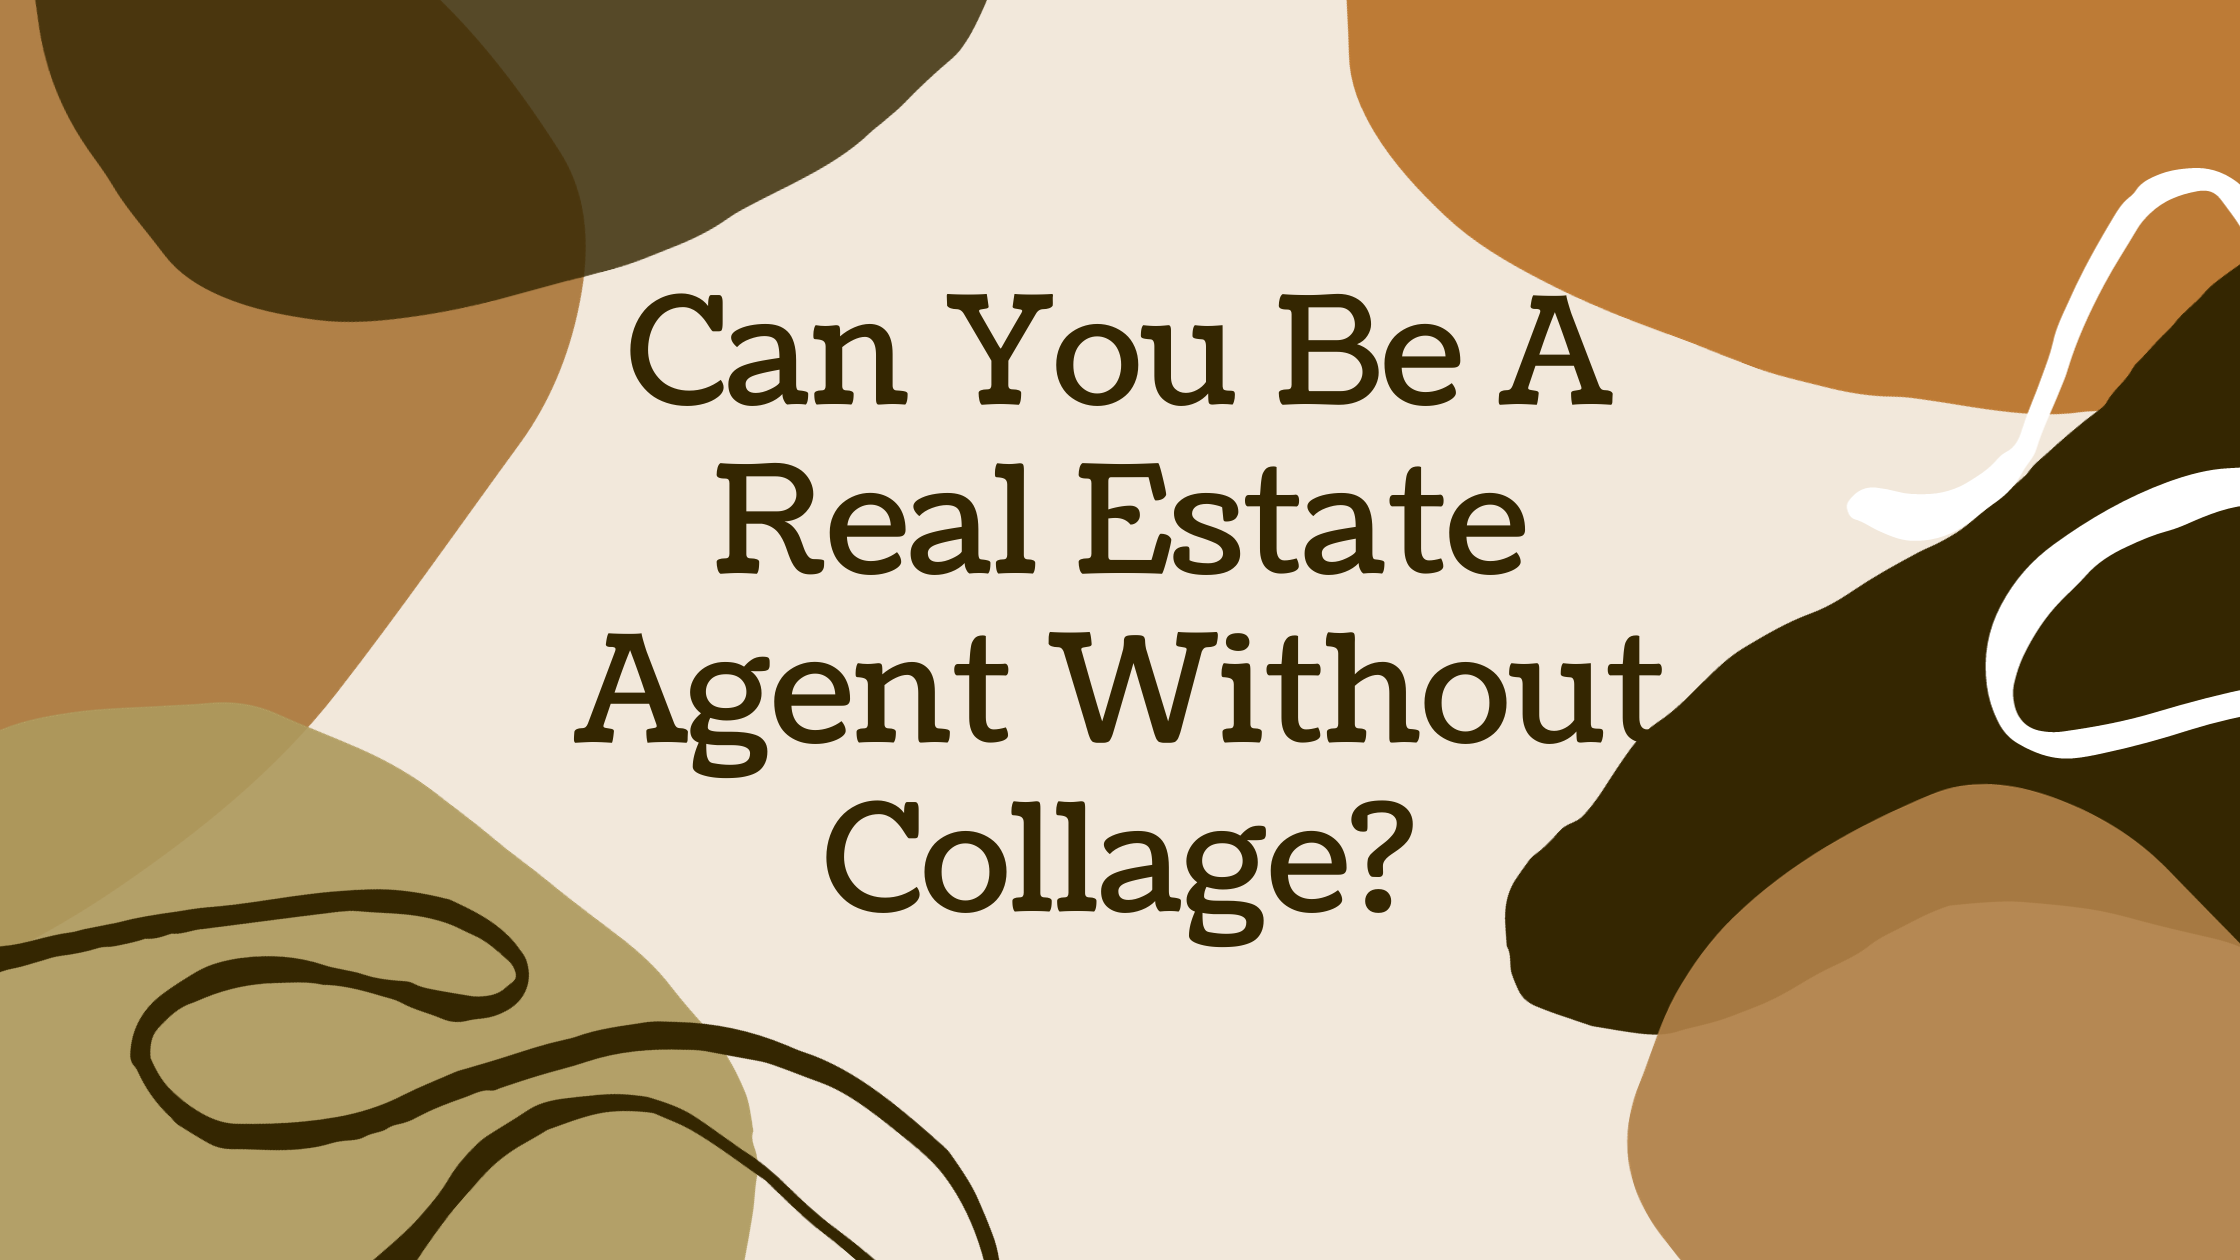 Can you be a real estate agent without collage